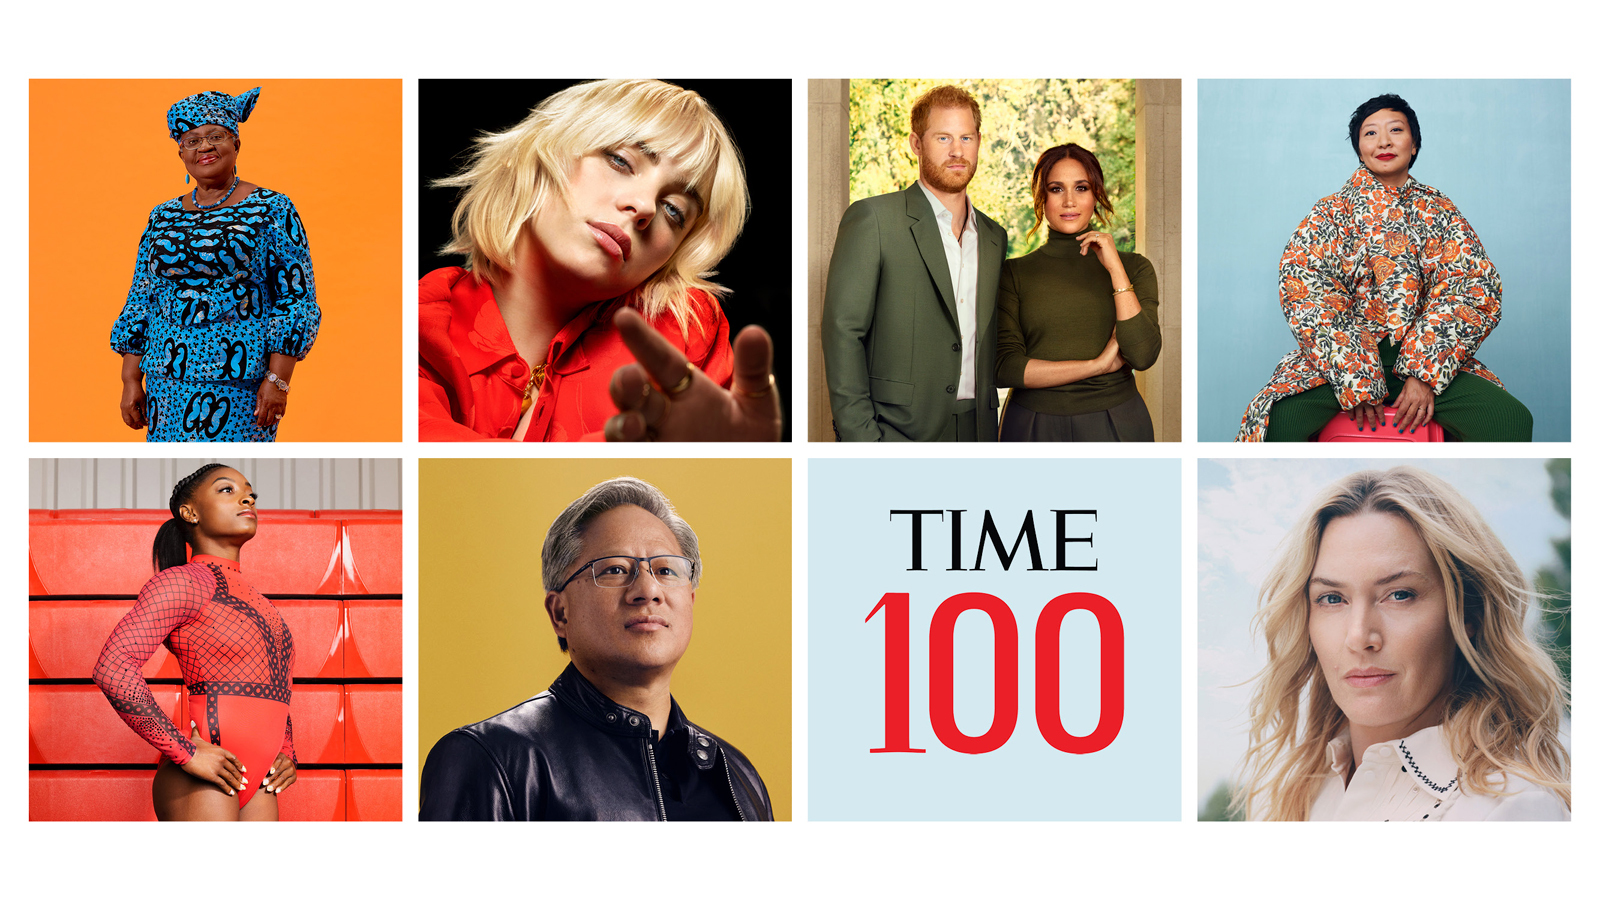 TIME100 2021 covers